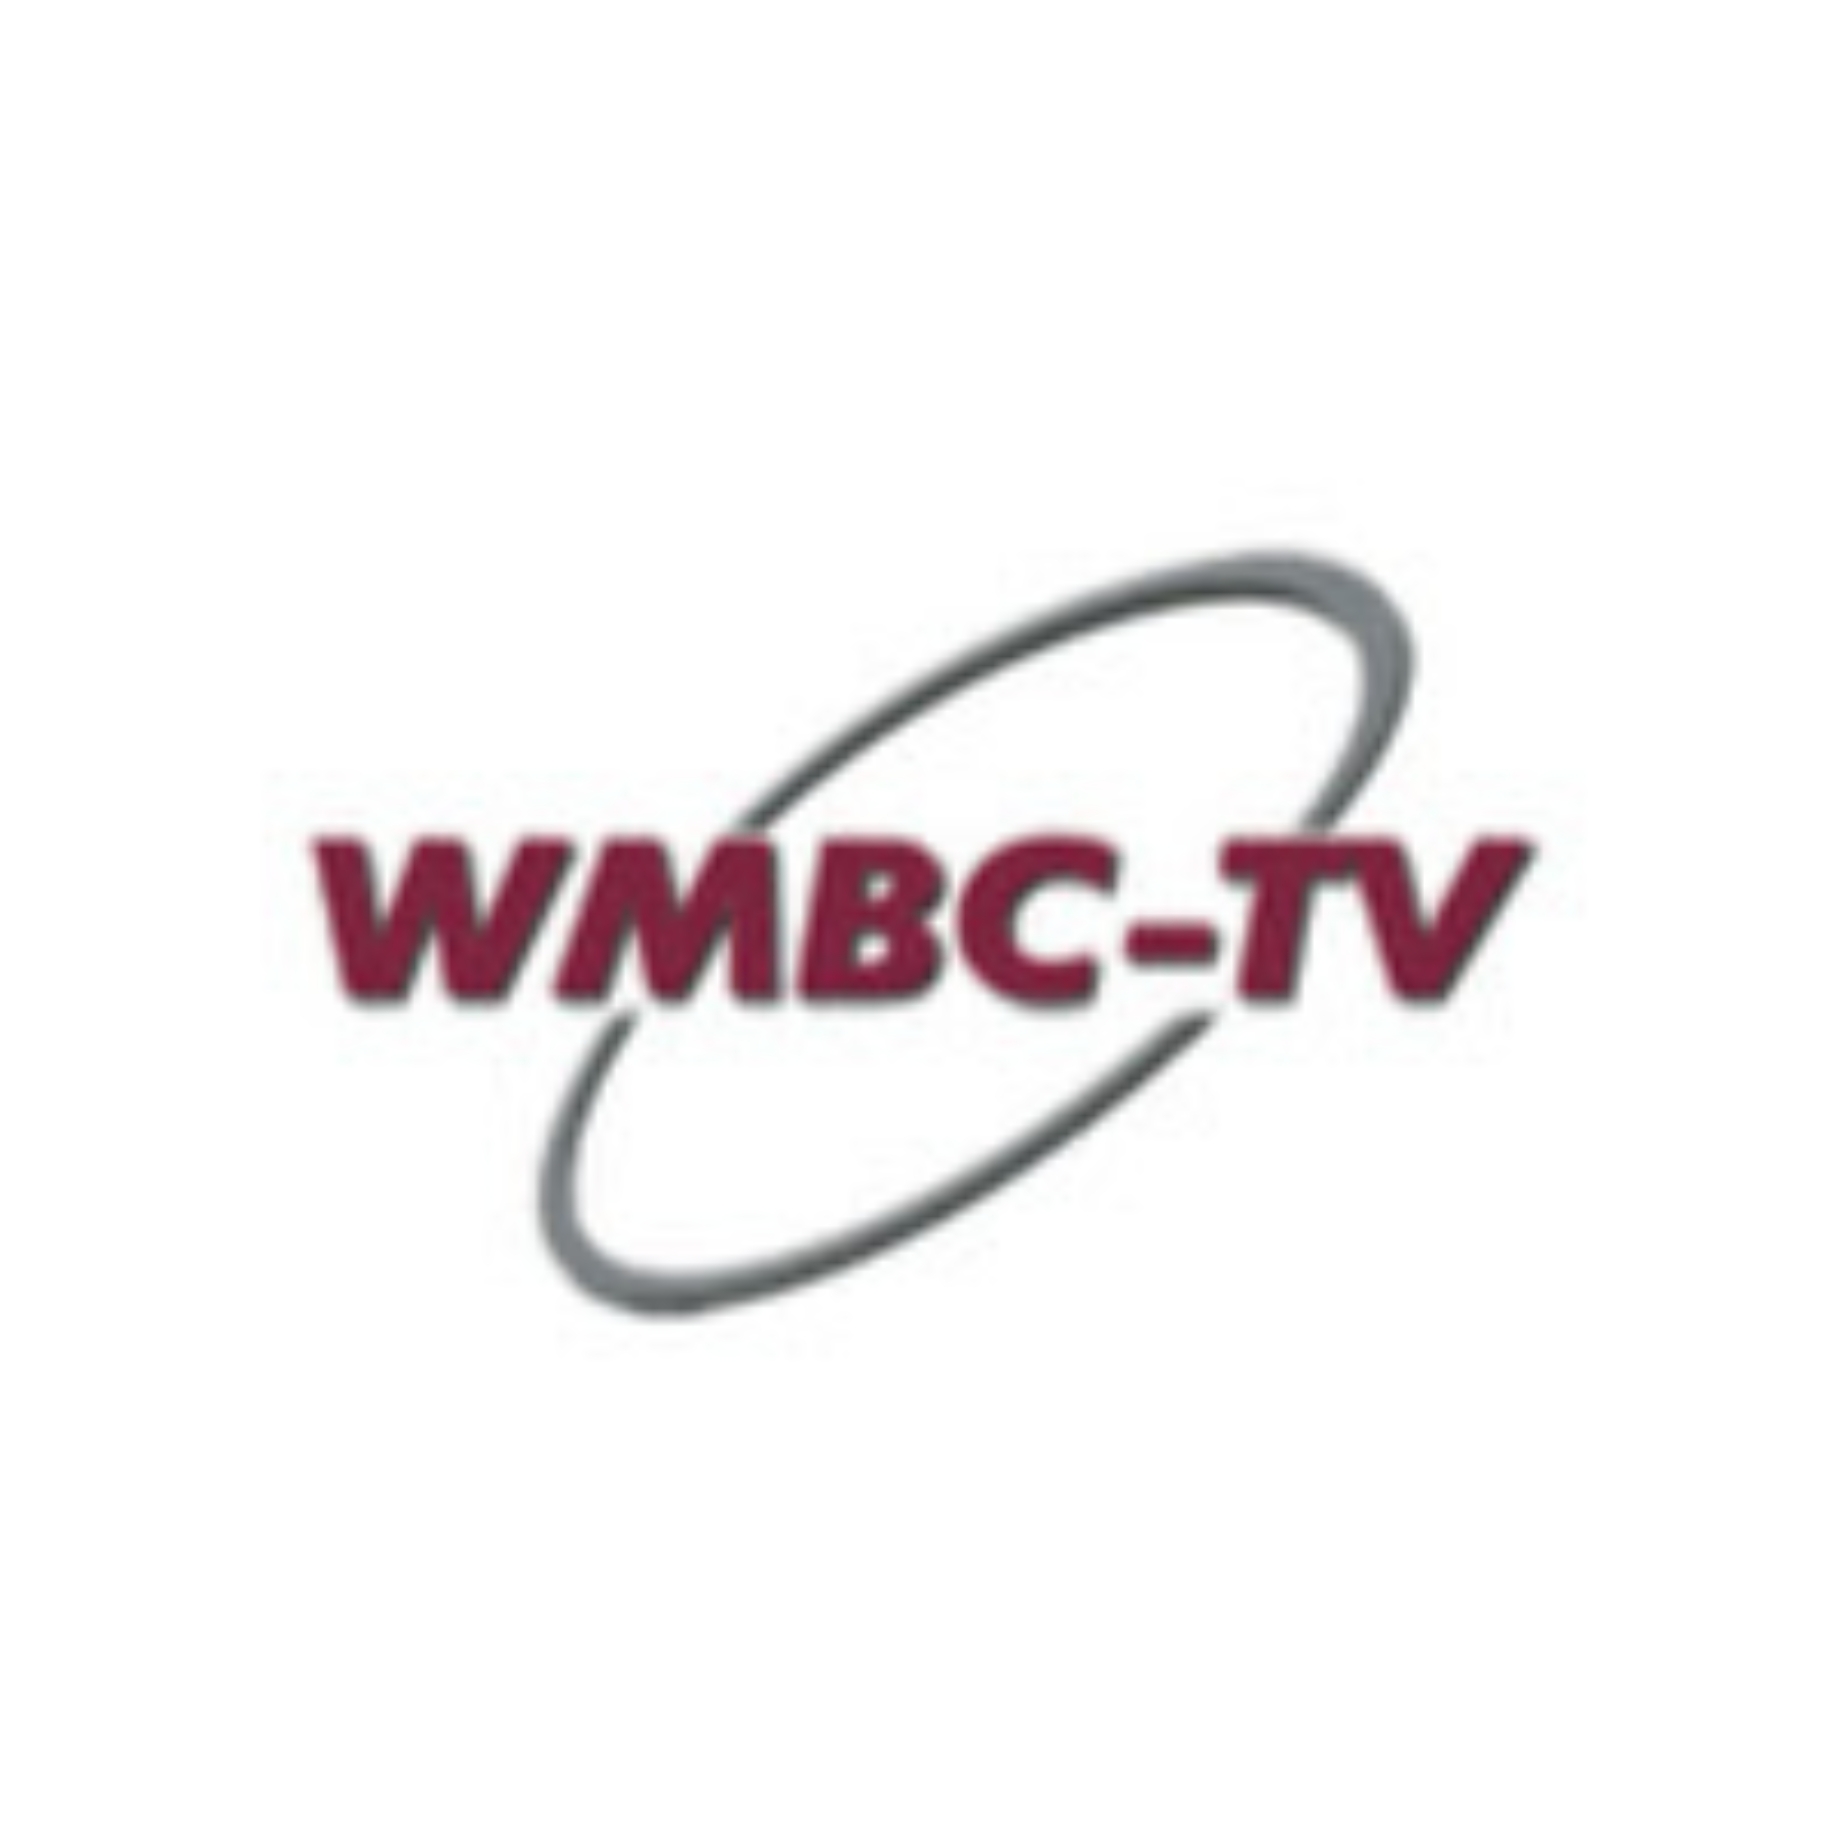 Table to Table was featured on WMBC-TV